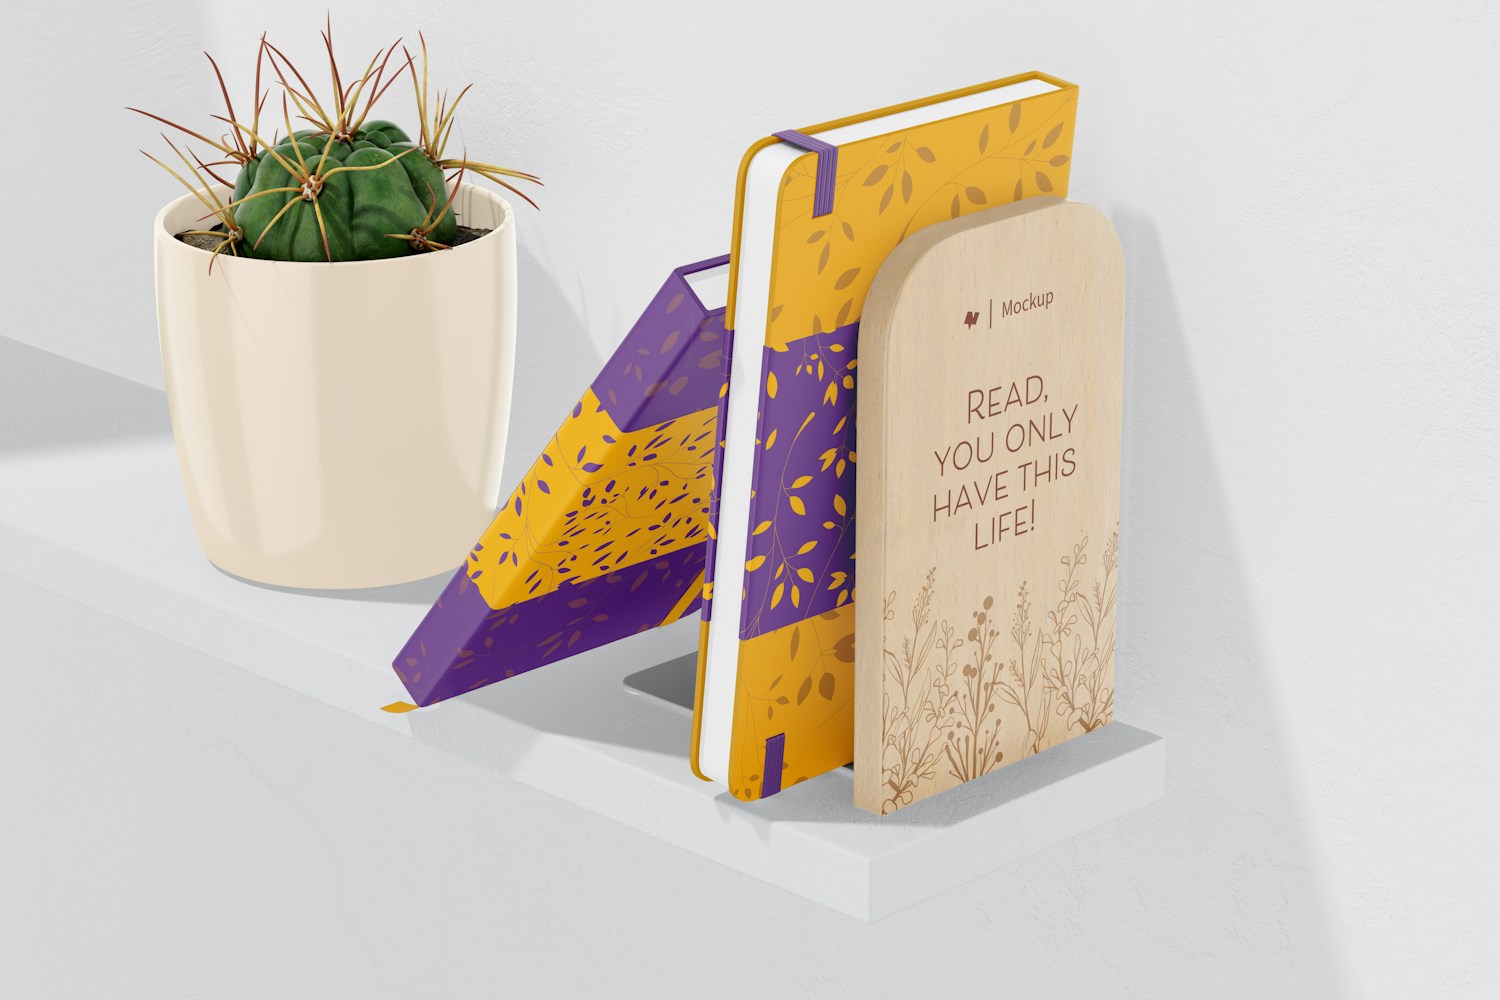 Wood Bookend Mockup, Perspective